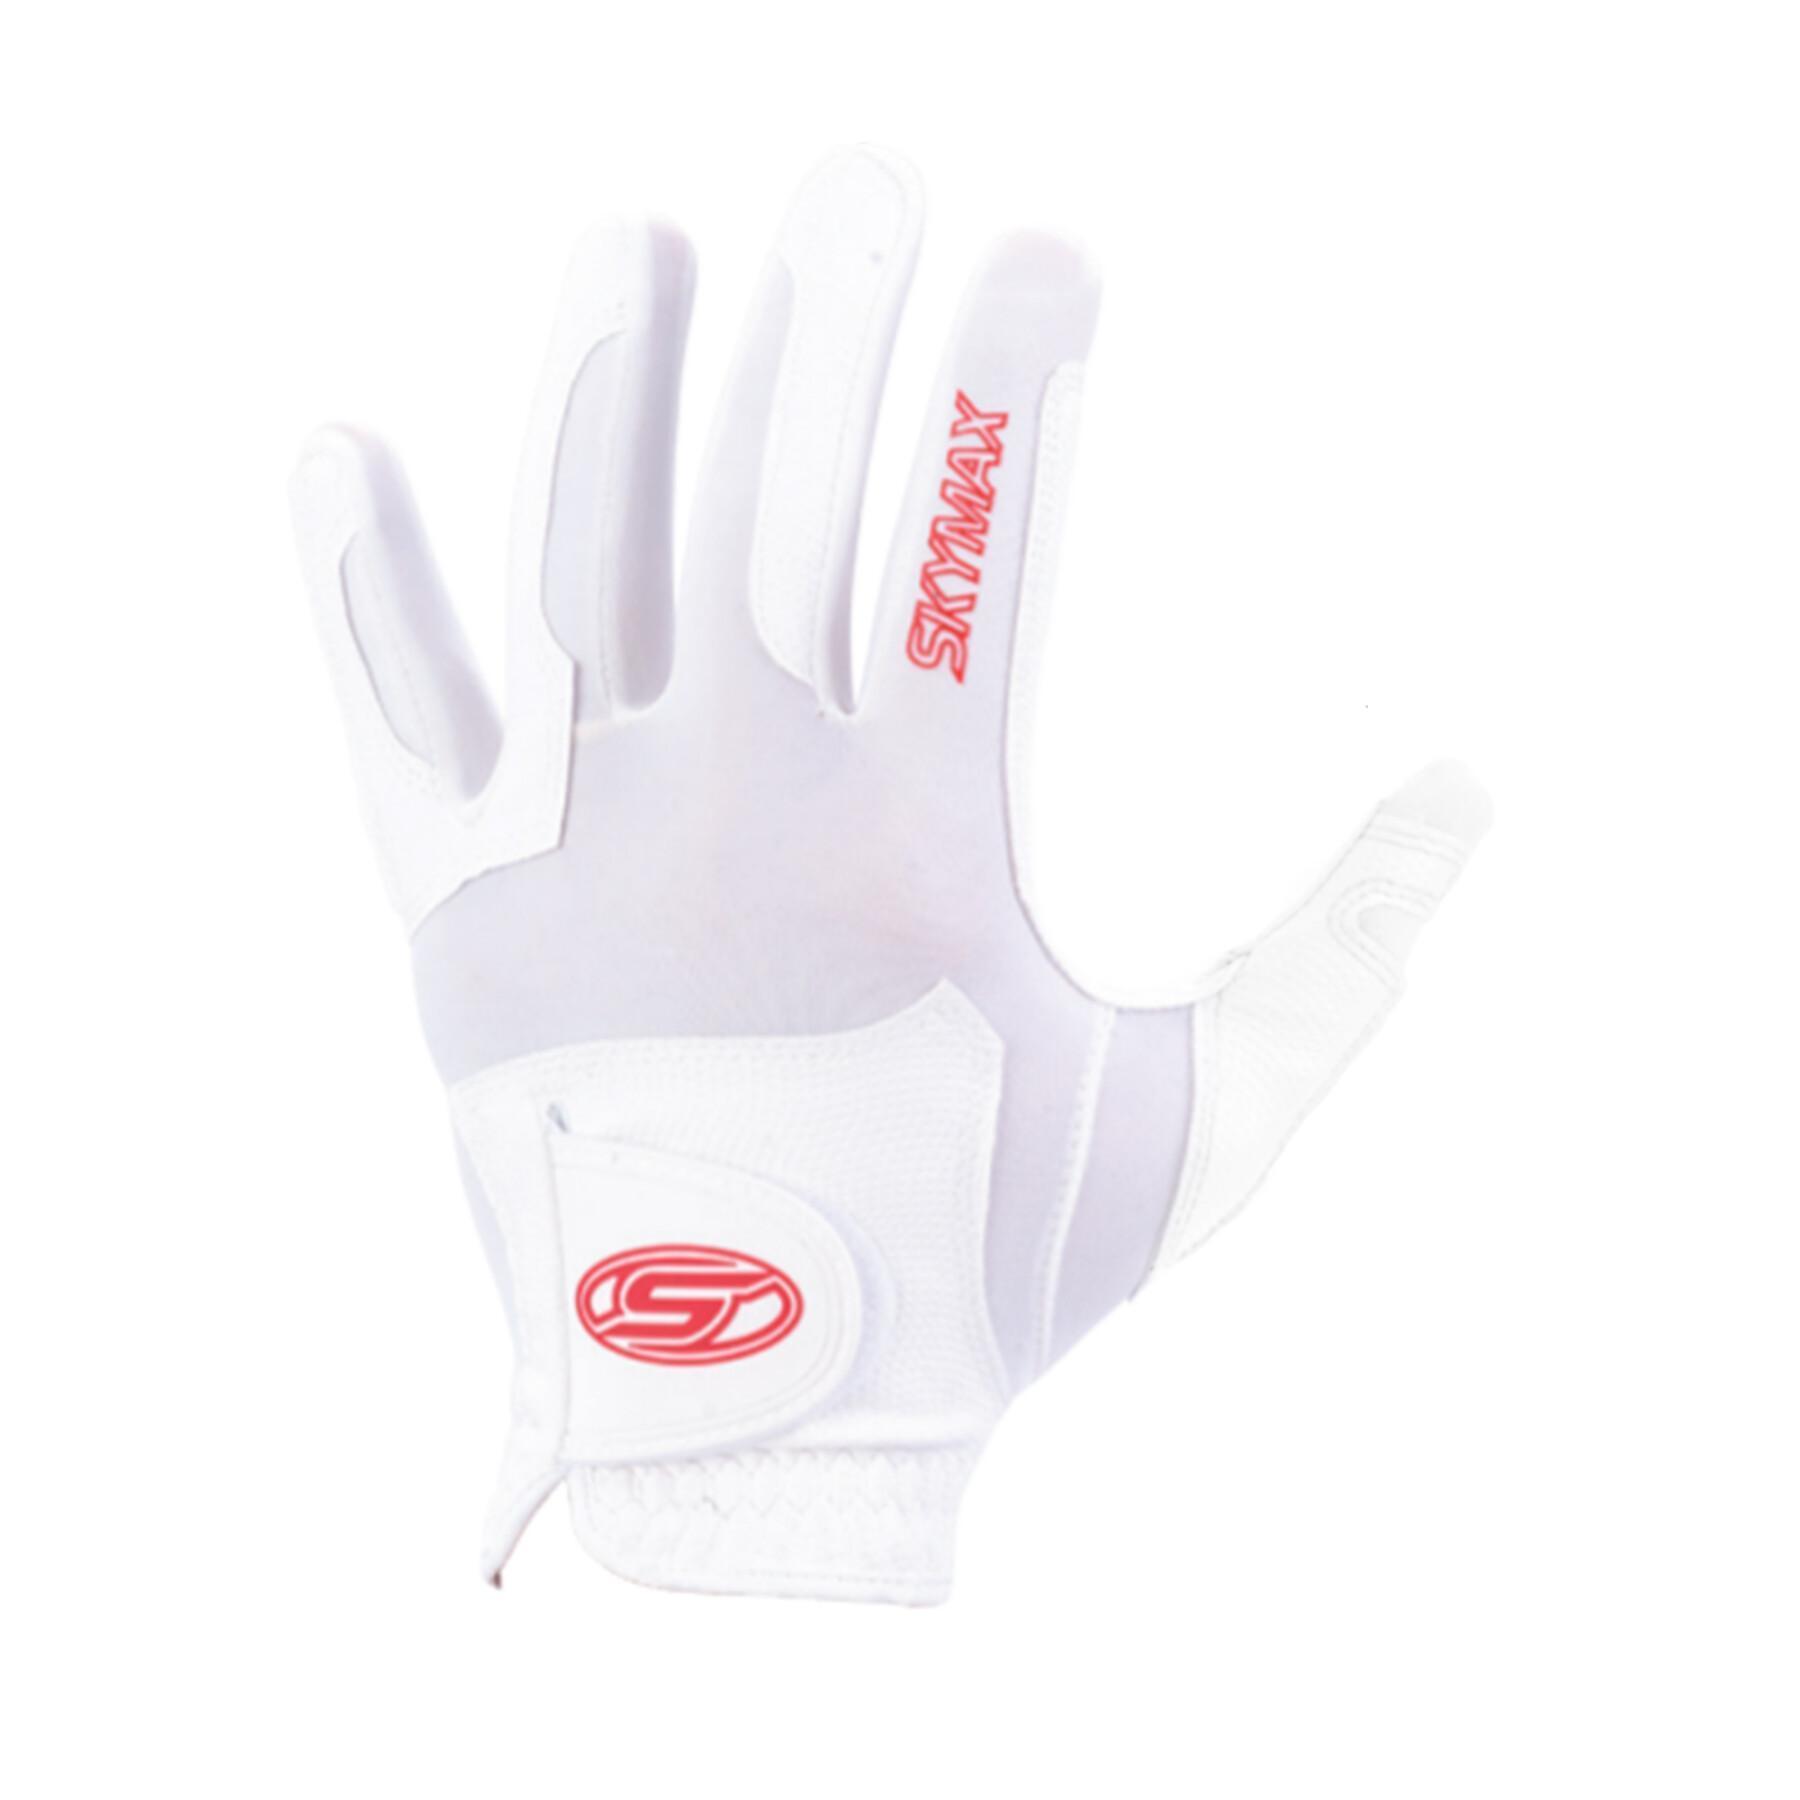 Guantes de golf para mujer Skymax All Weather Glove Lady